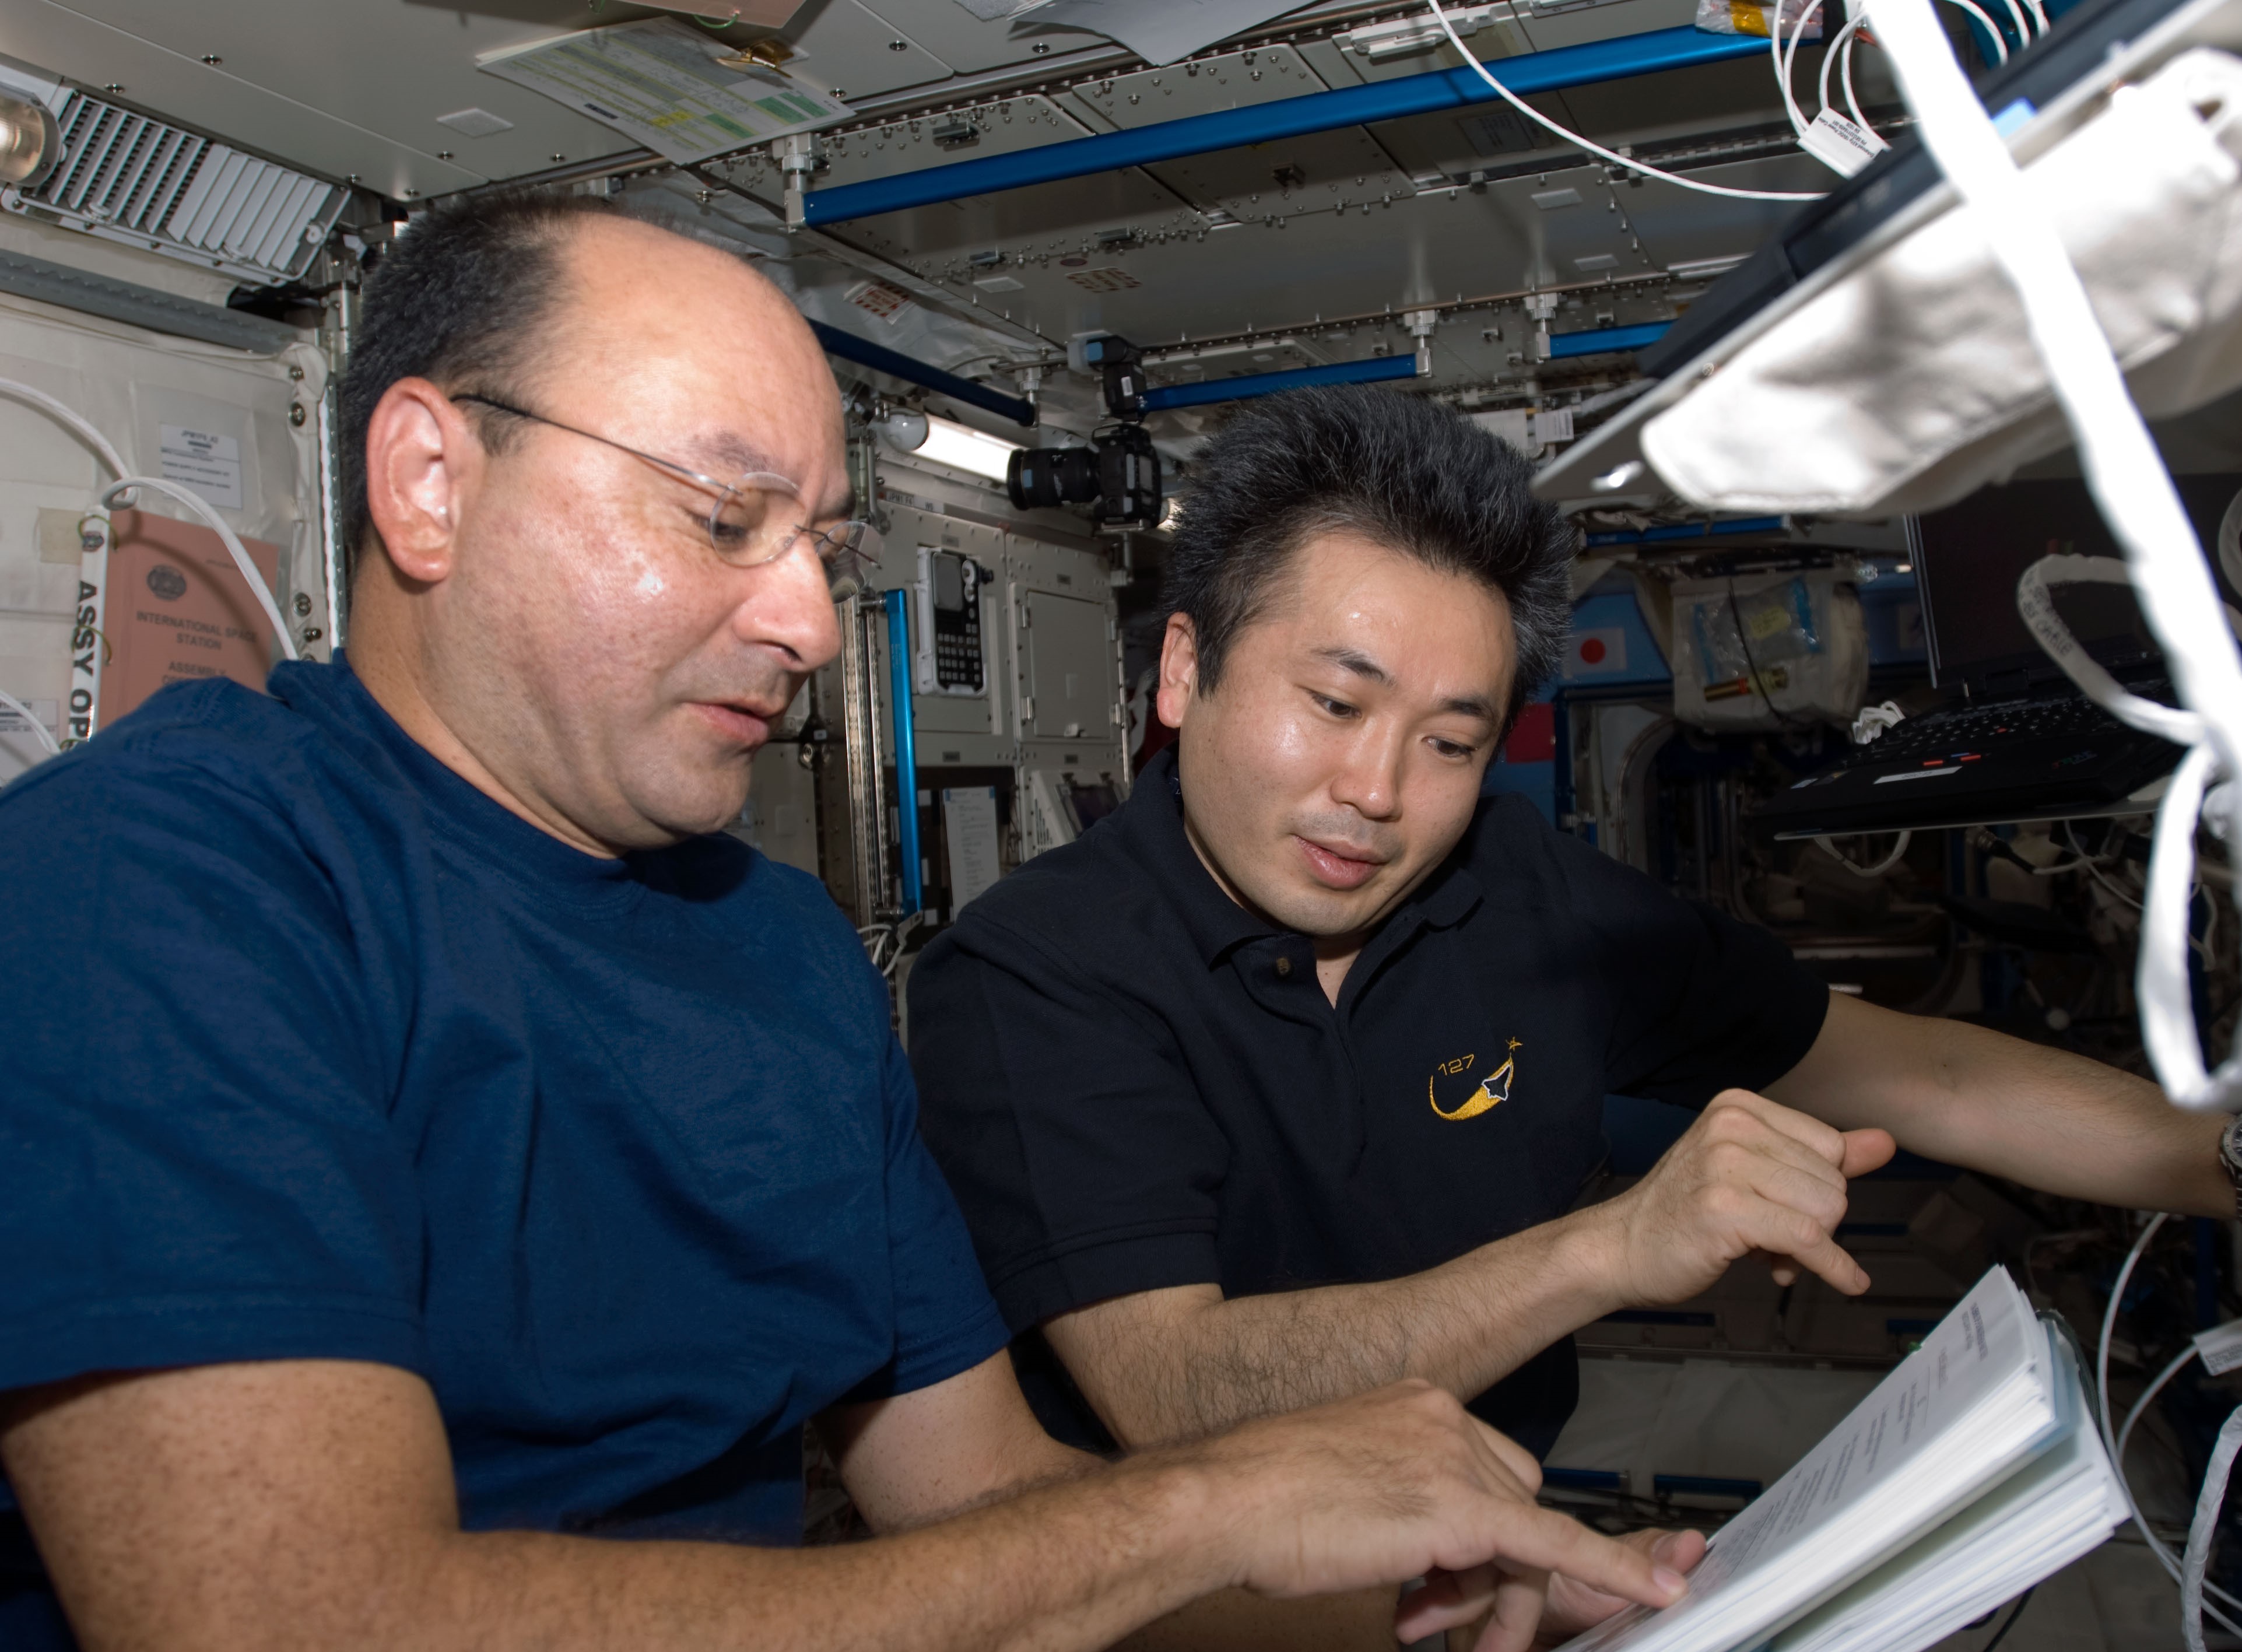 Mark J. Polansky, left, and Koichi Wakata of the Japan Aerospace Exploration Agency, one of the three teams that transferred the EF payloads using Kibo's robotic arm